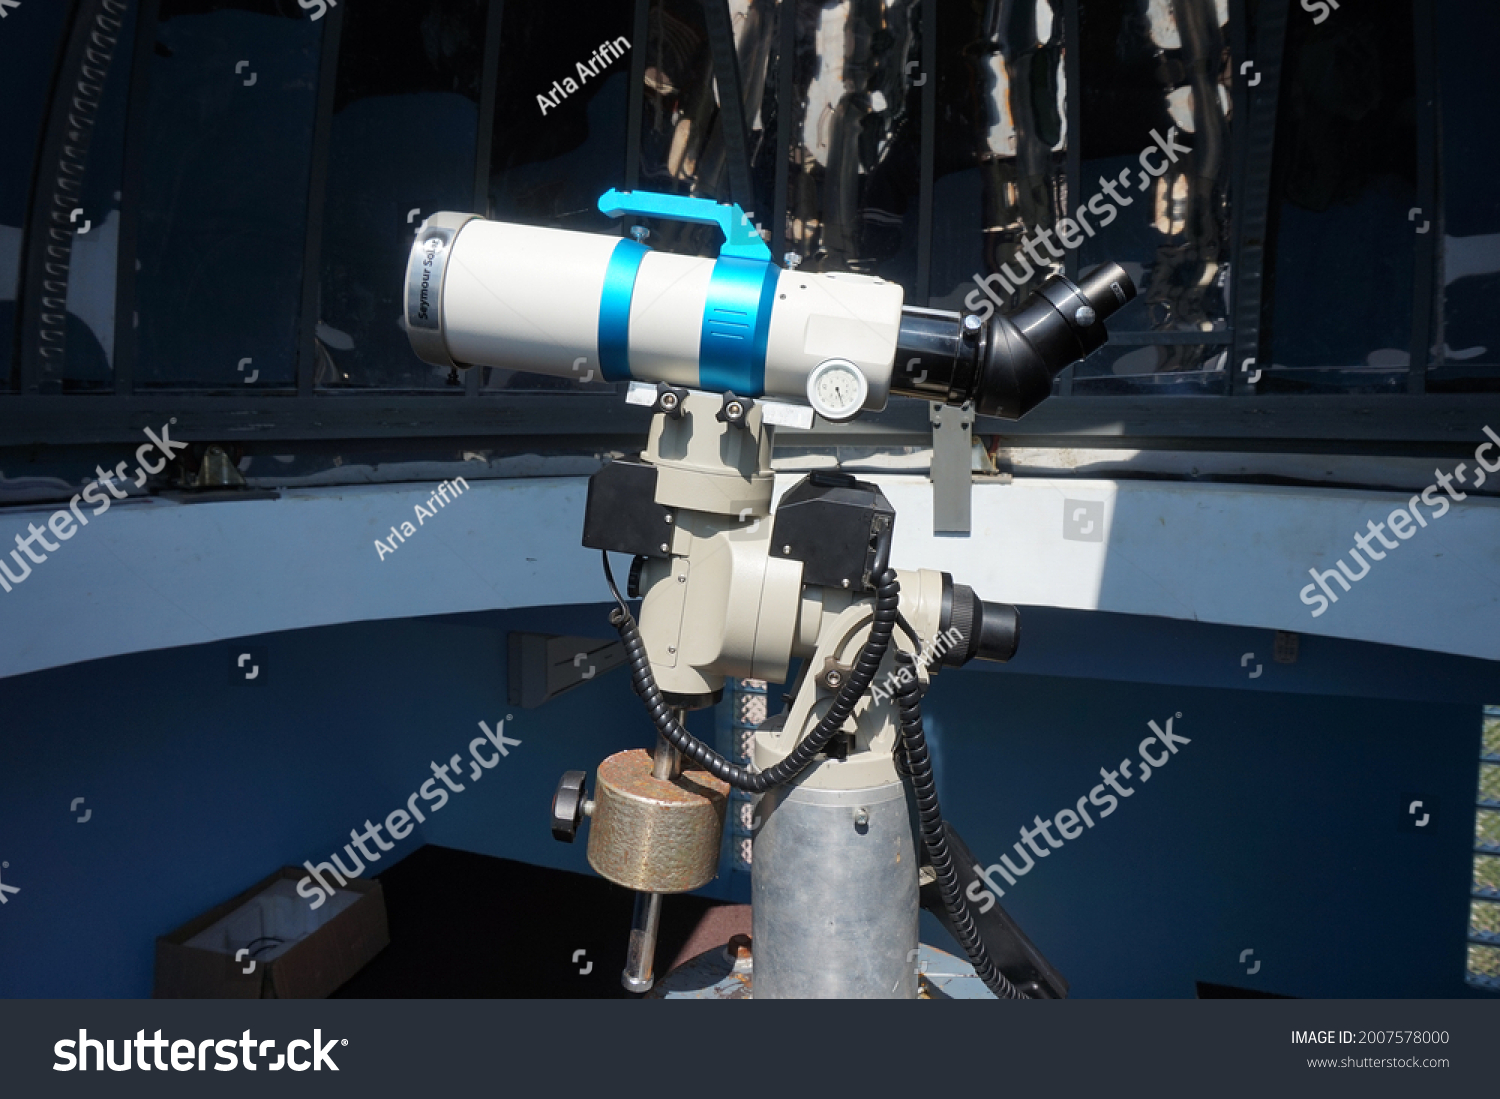 Telescope. A tool used by astronomers and people who want to see celestial bodies directly. #2007578000